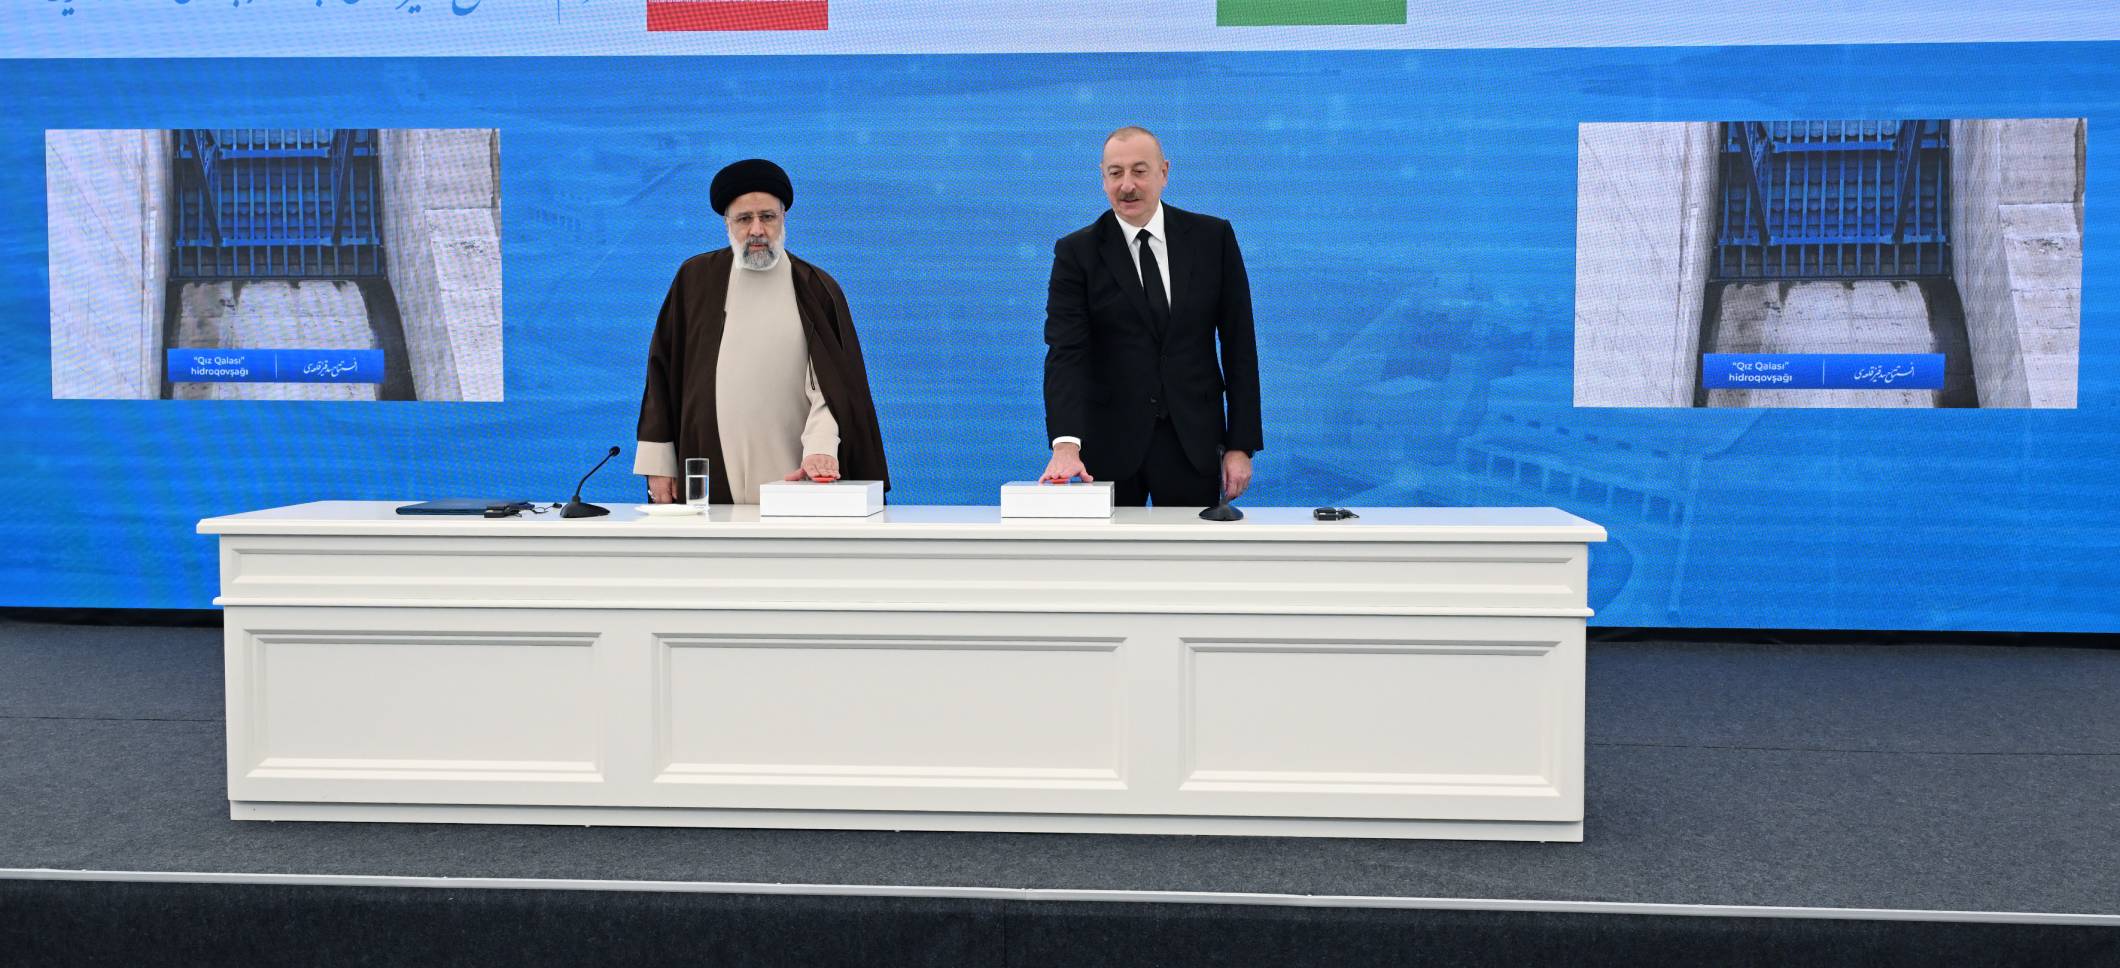 Ceremony to commission "Khudafarin" hydroelectric complex and inaugurate "Giz Galasi" hydroelectric complex was held with participation of Azerbaijani and Iranian Presidents